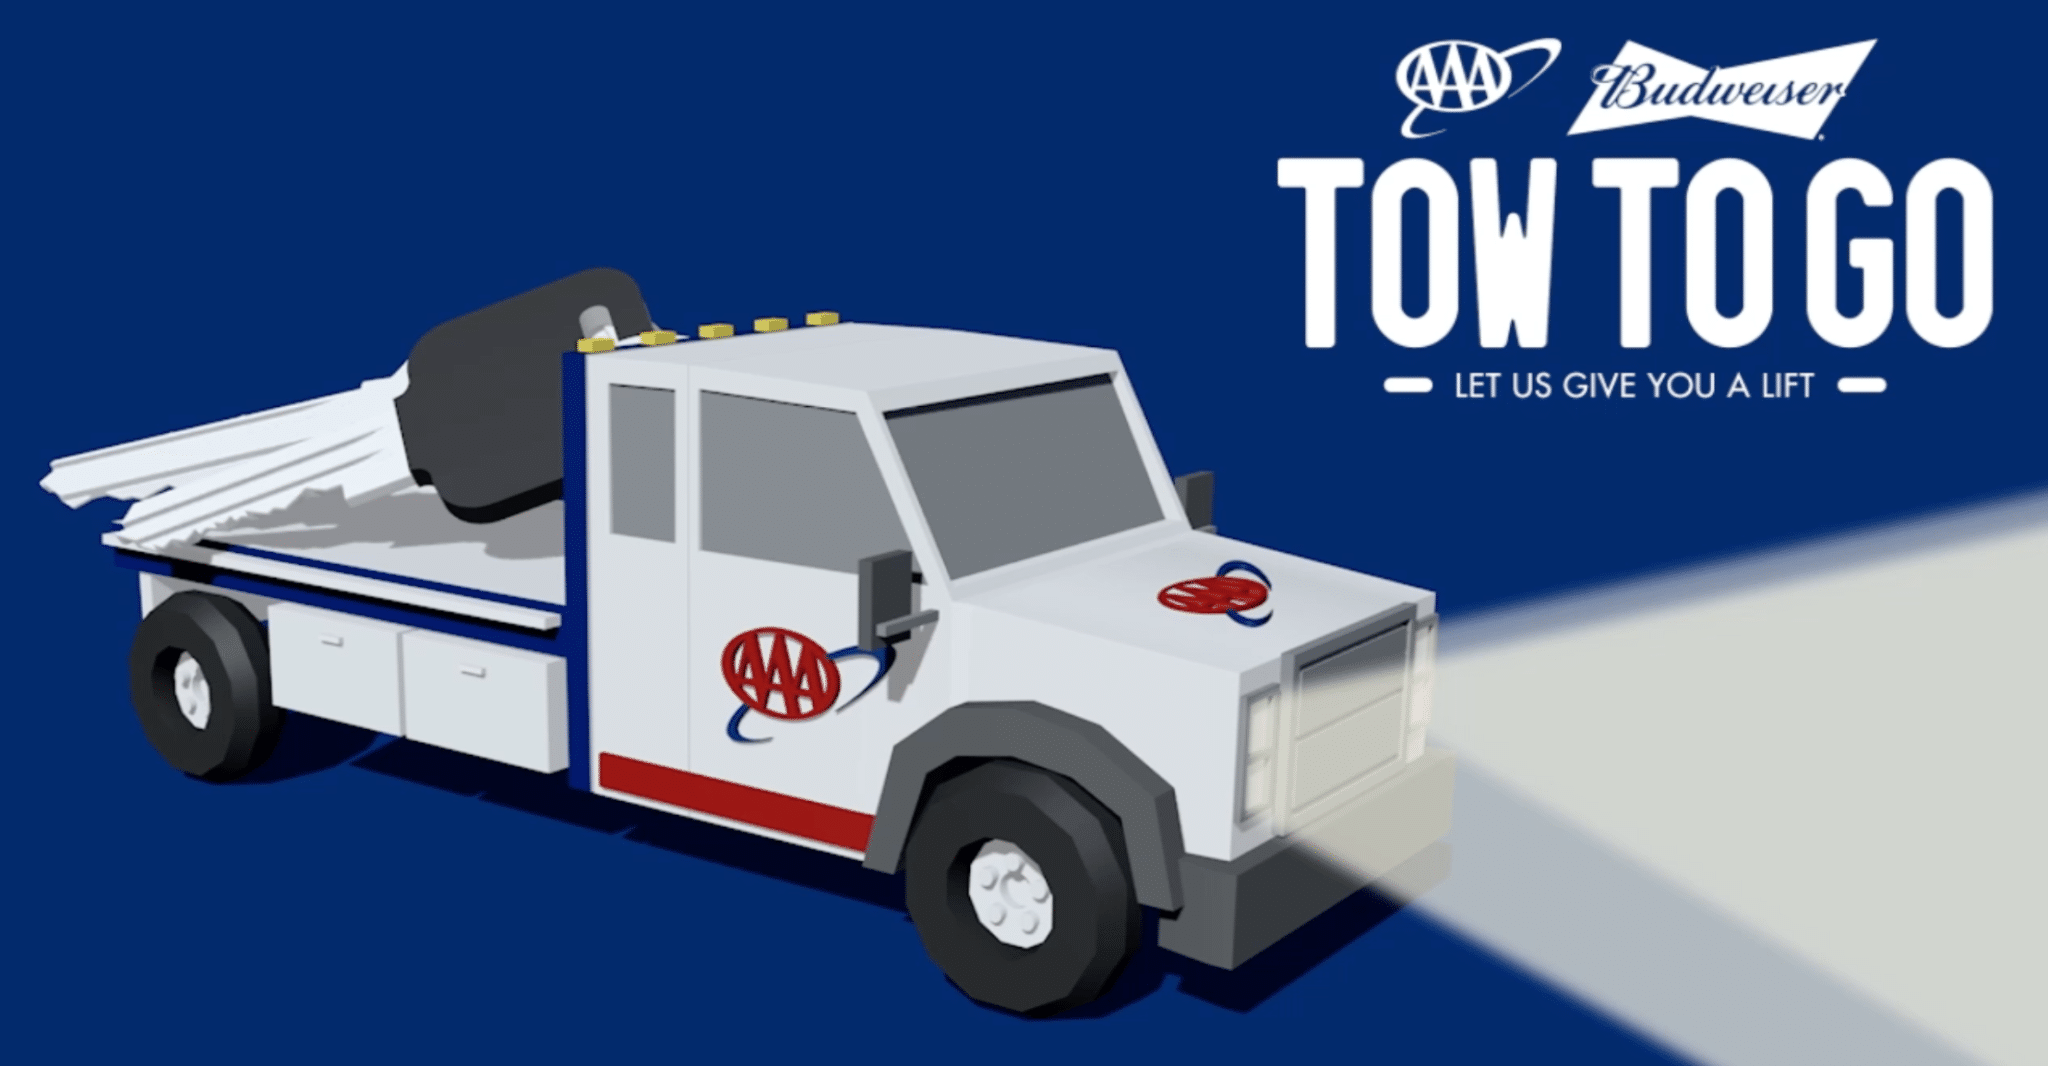 Did you know AAA will drive you (and your car) home from a Super Bowl party?